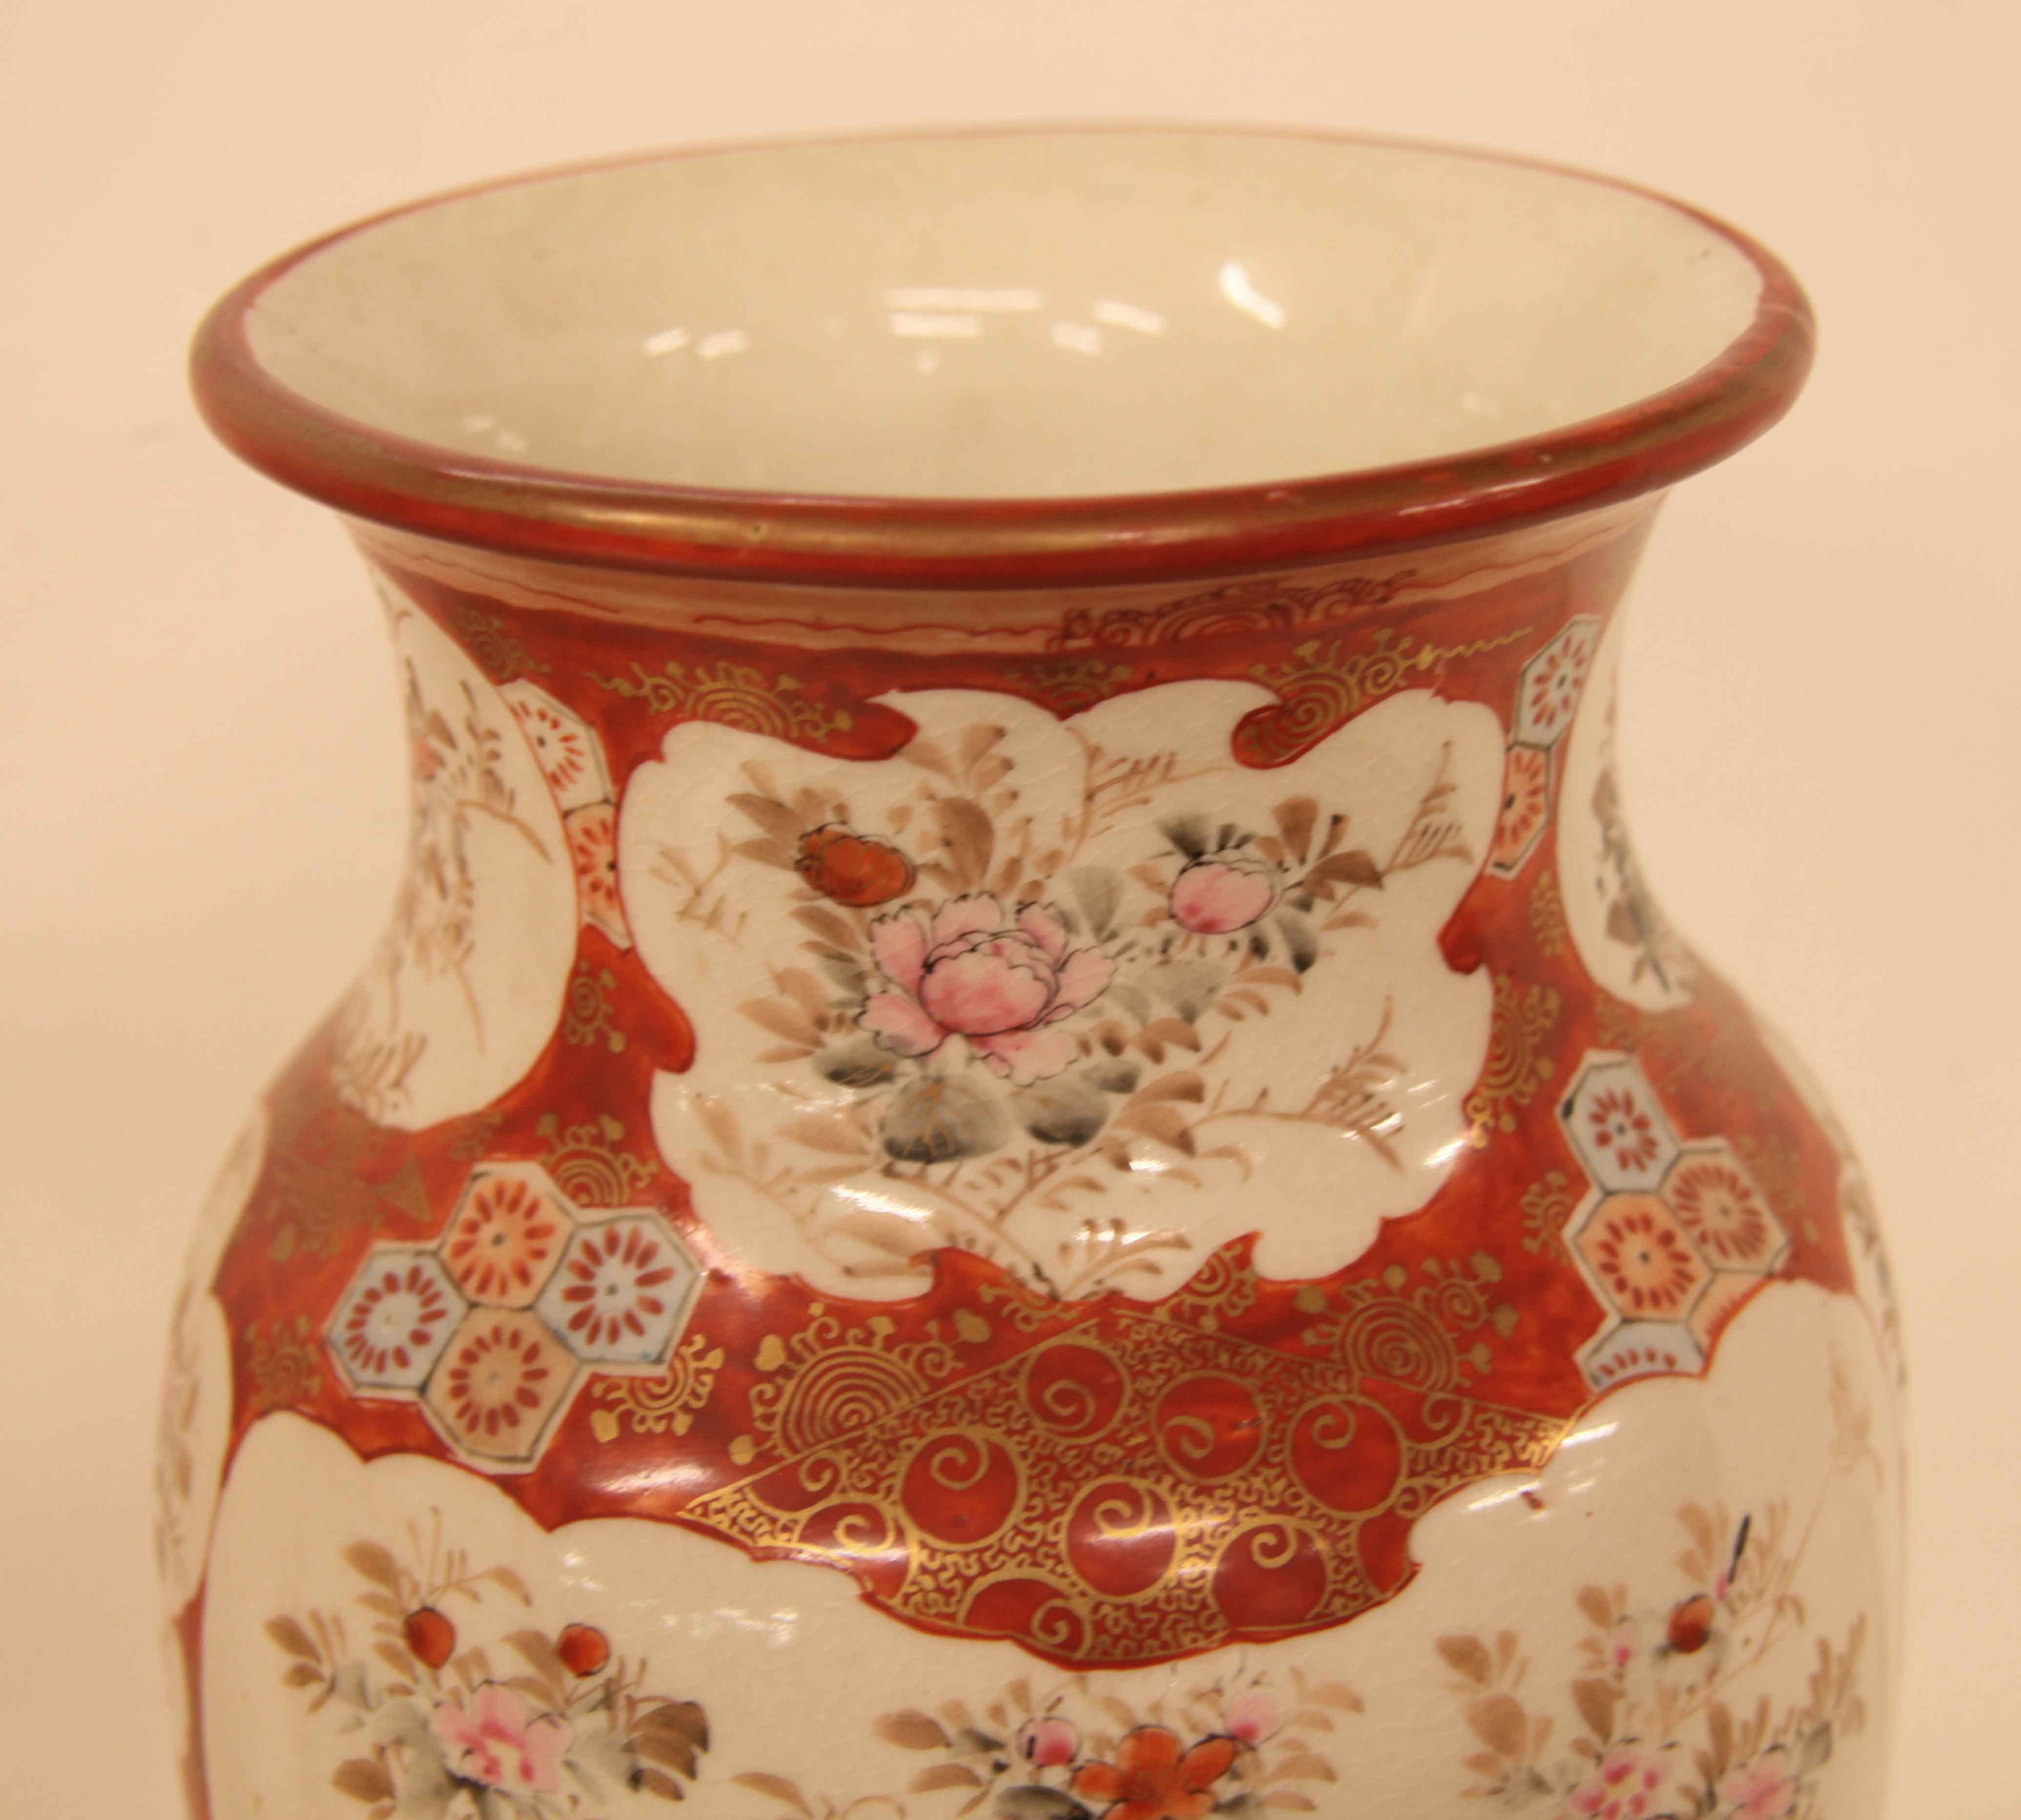 Pair of Japanese Kutani vases, the rim is decorated with a series of floral scenes, below in the main body on each side are panels featuring a single brid surrounded by flowers and foliate; between these are scalloped shaped scenes of flowers and